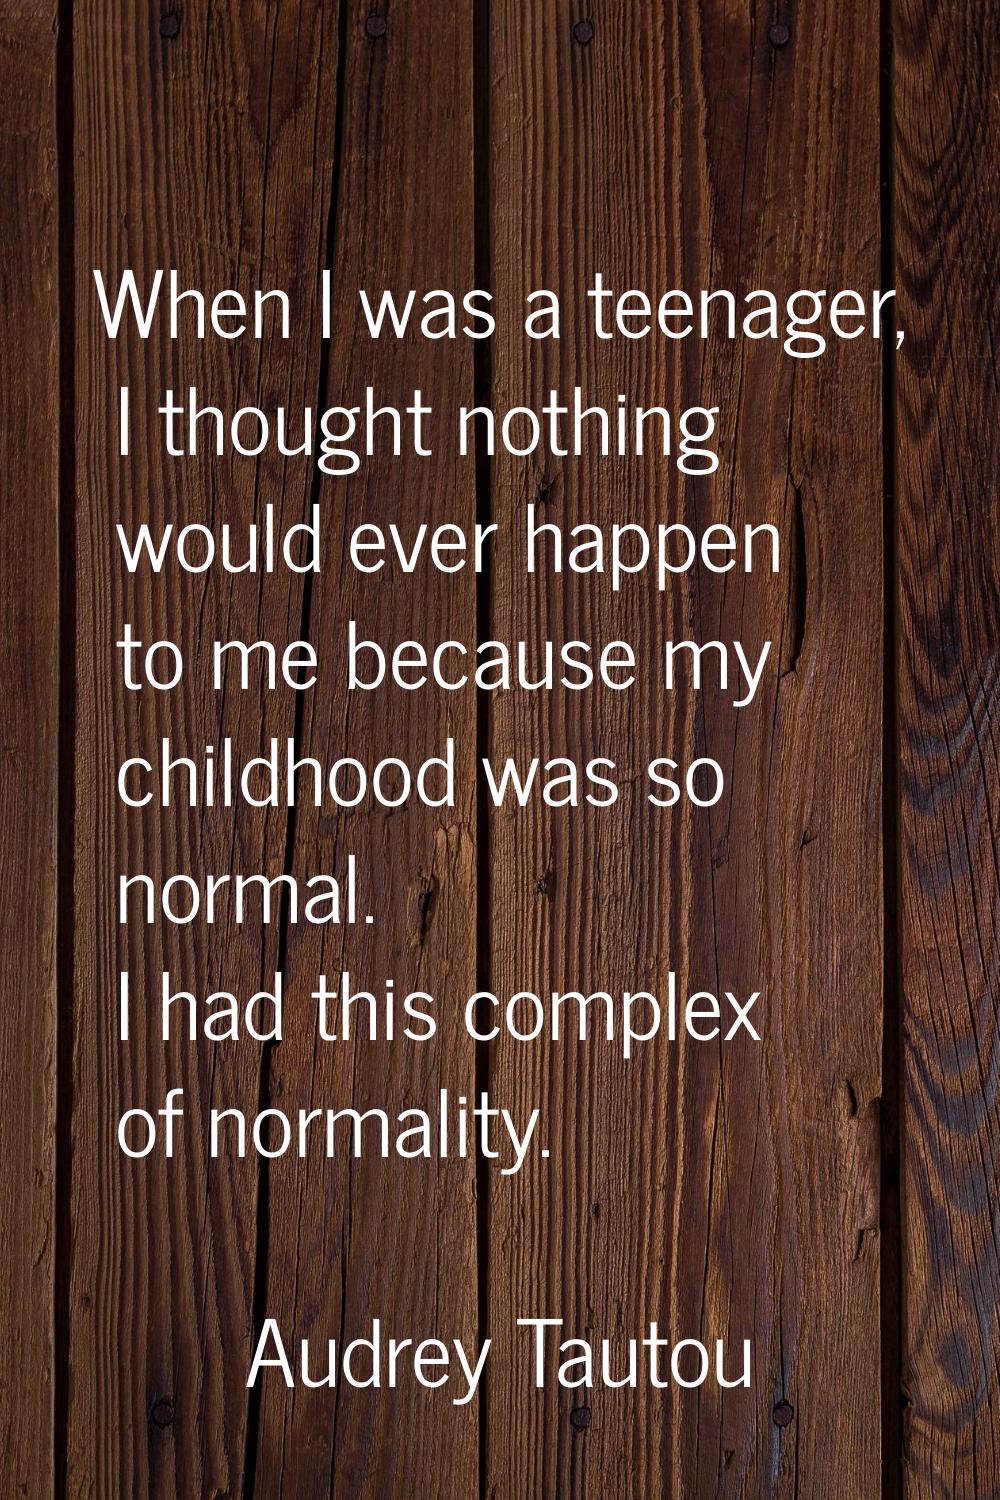 When I was a teenager, I thought nothing would ever happen to me because my childhood was so normal